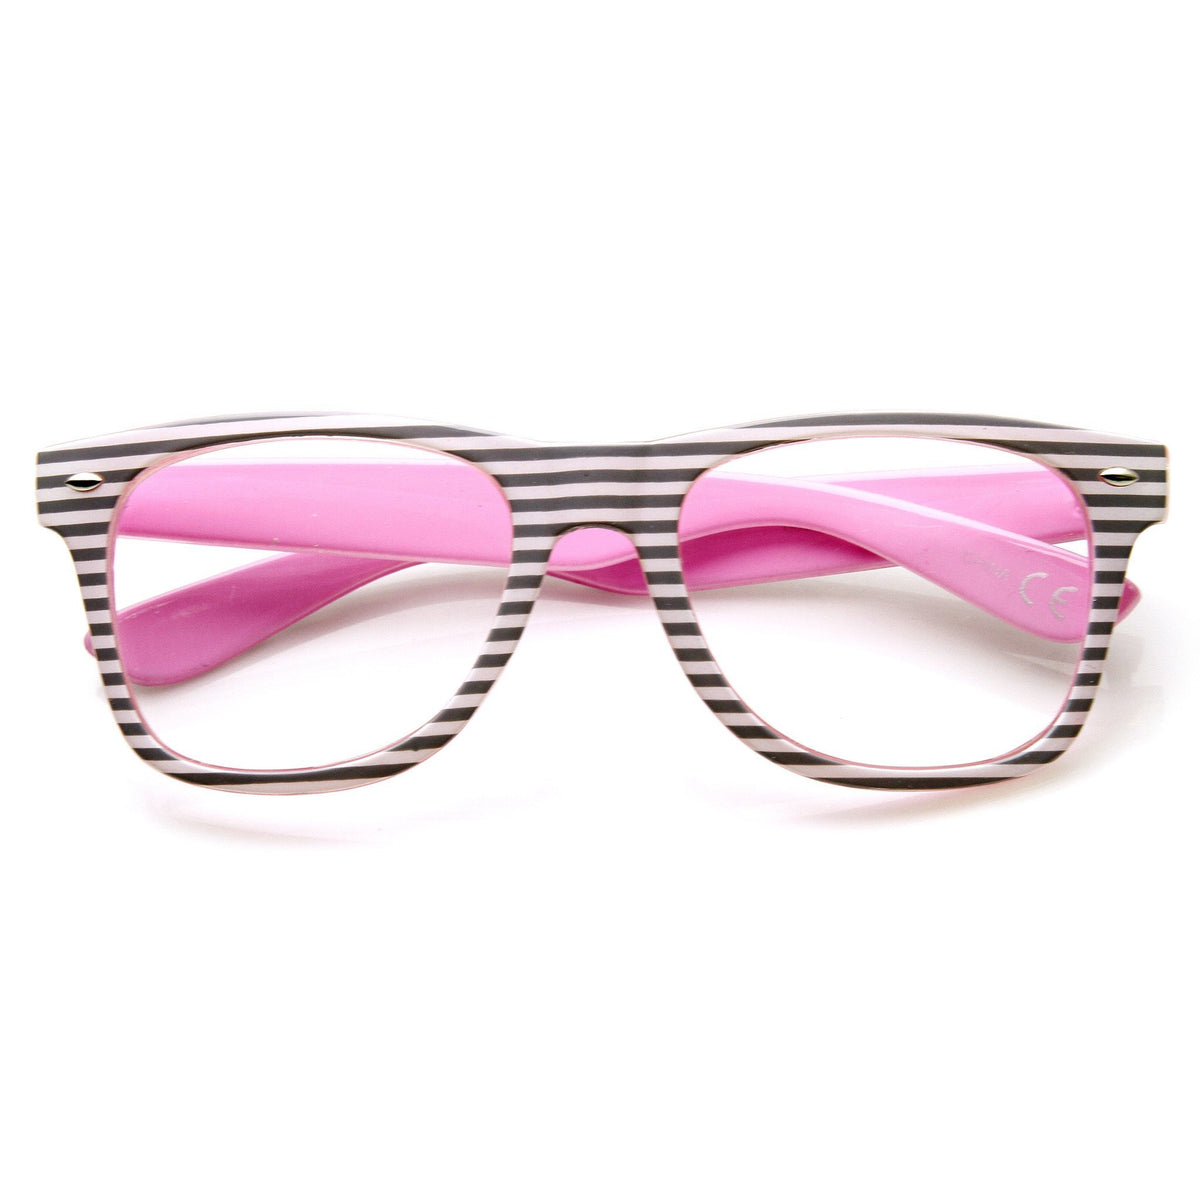 Two Tone Pastel Striped Clear Lens Horned Rim Glasses